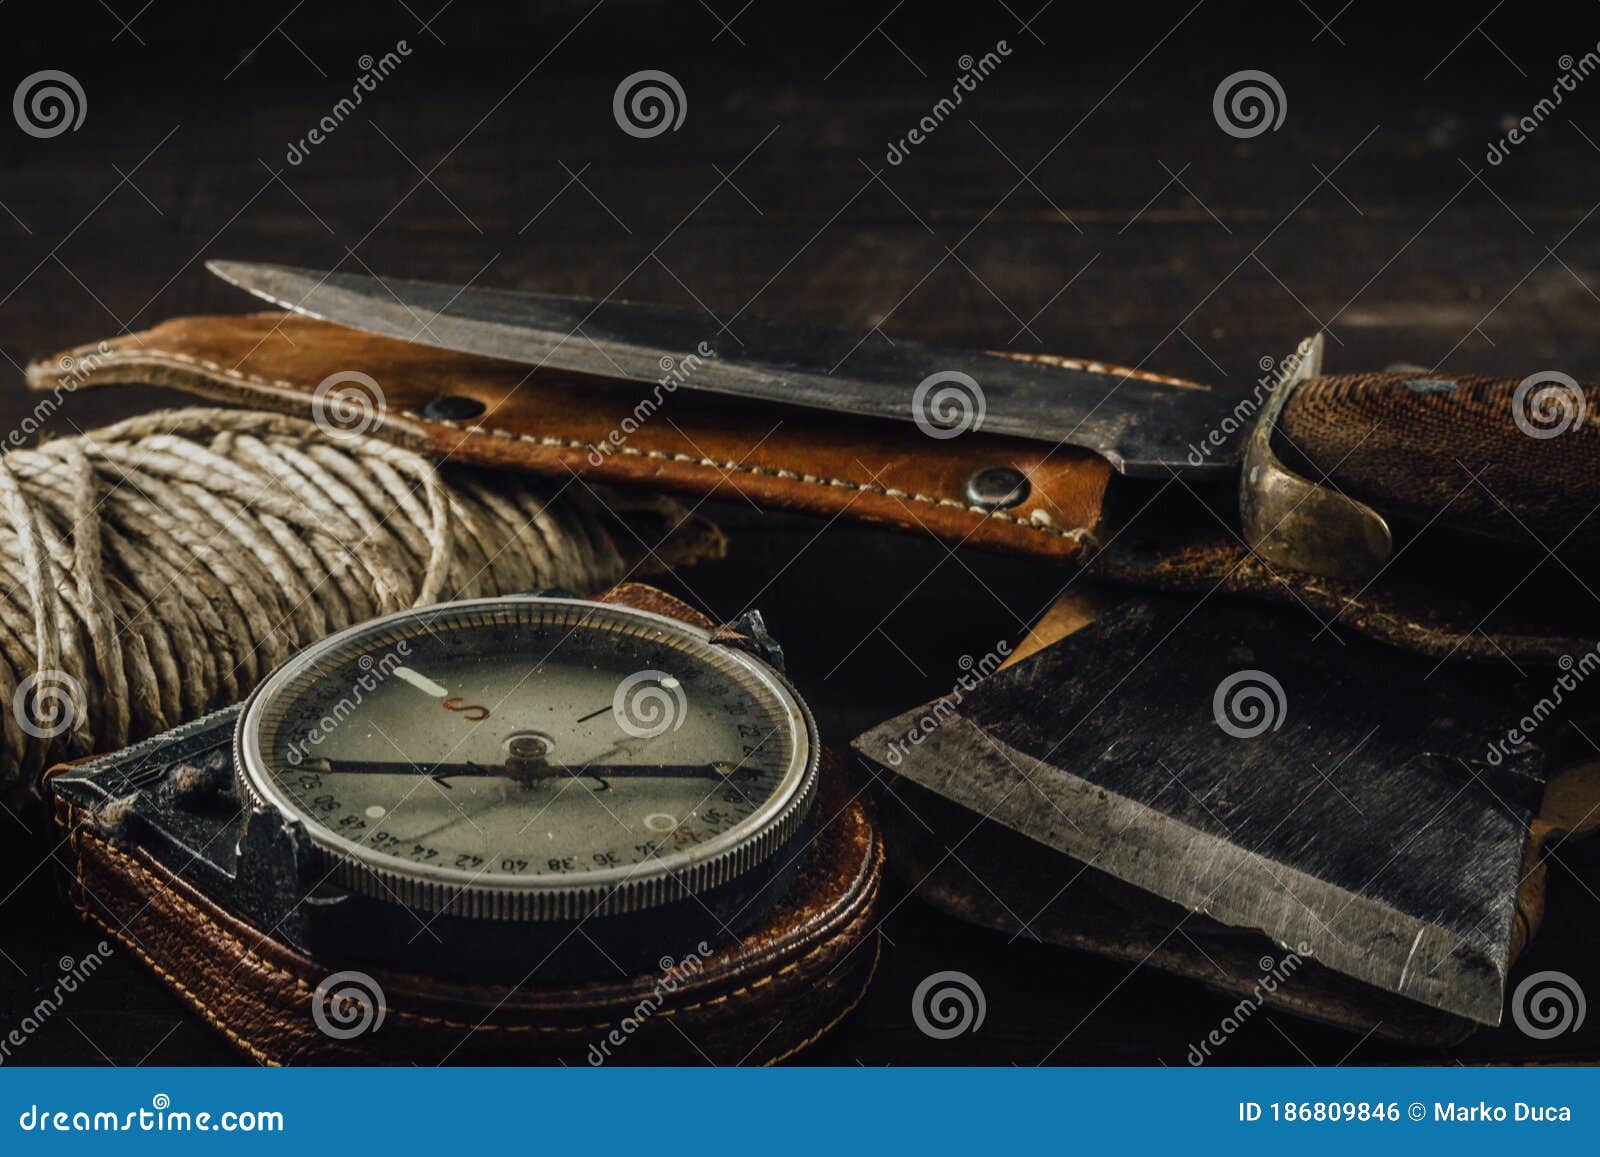 old military compass, rusty hunting bushcraft knife, small axe and a linen rope on the dark wooden table.